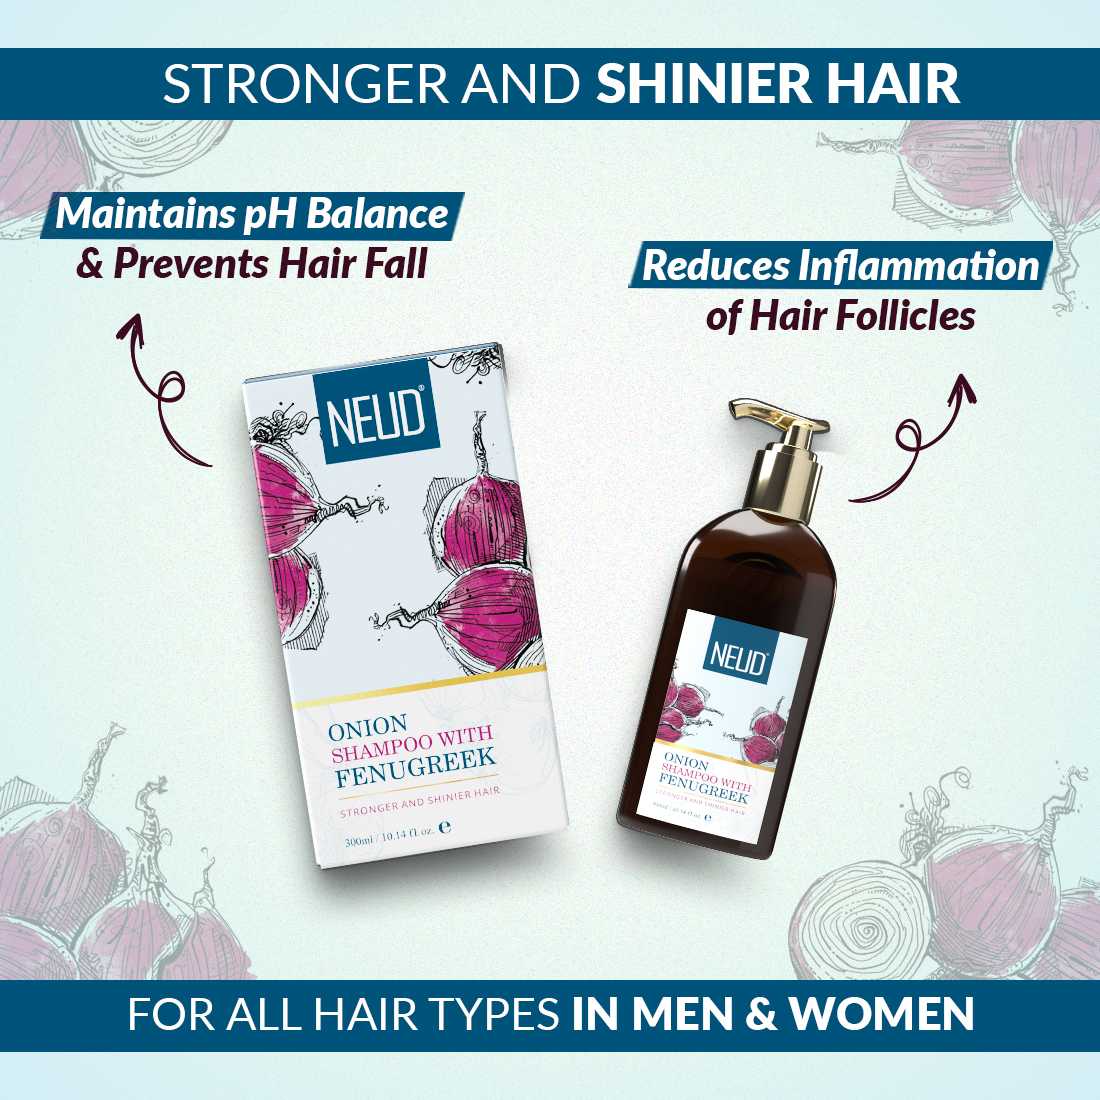 NEUD Combo - Onion Hair Oil and Shampoo with Fenugreek for Men & Women